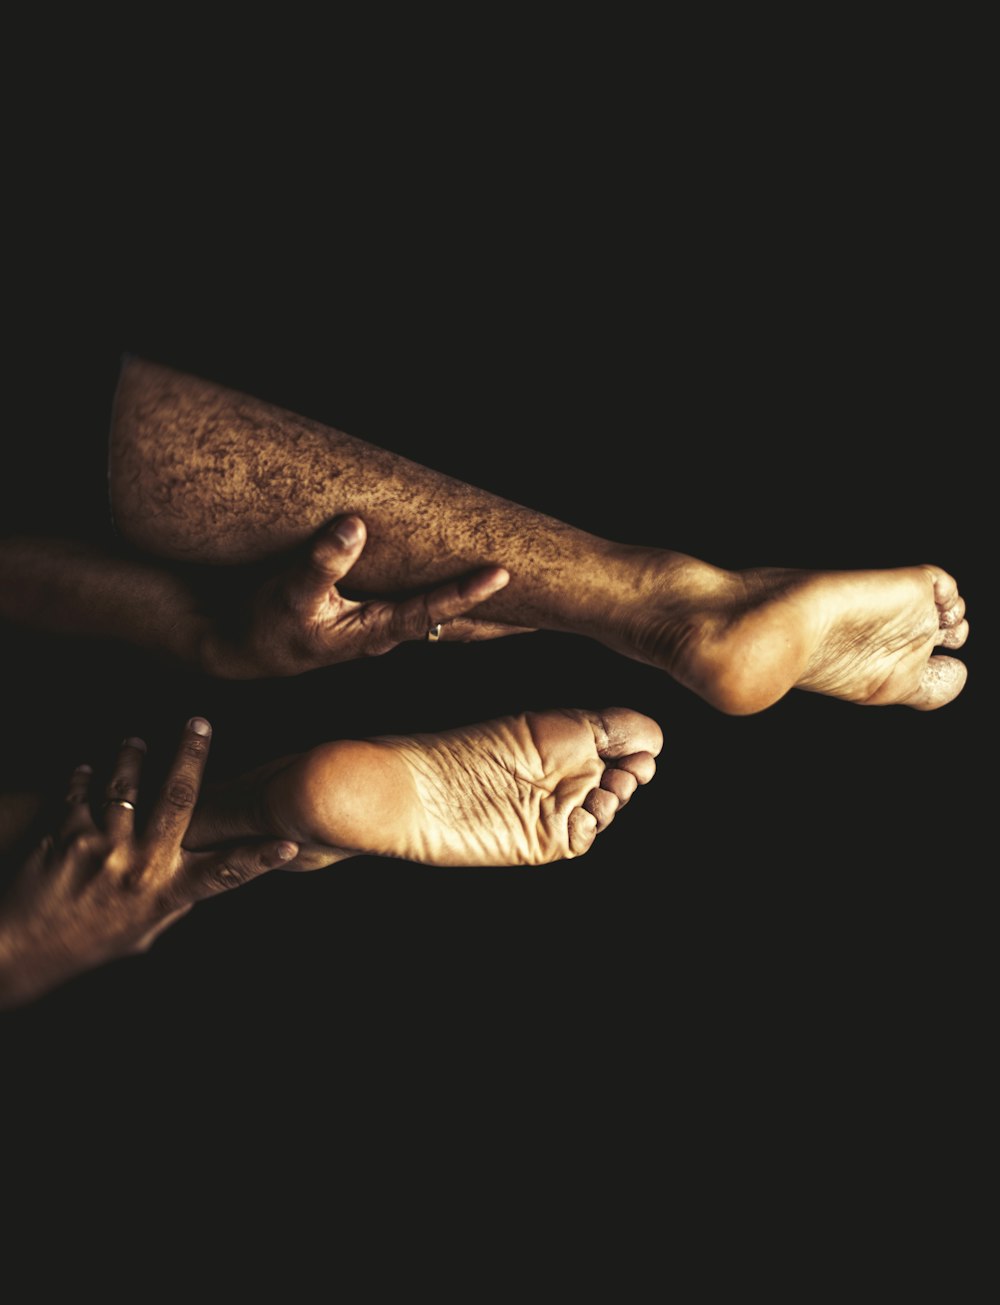 Male Feet Pictures | Download Free Images on Unsplash